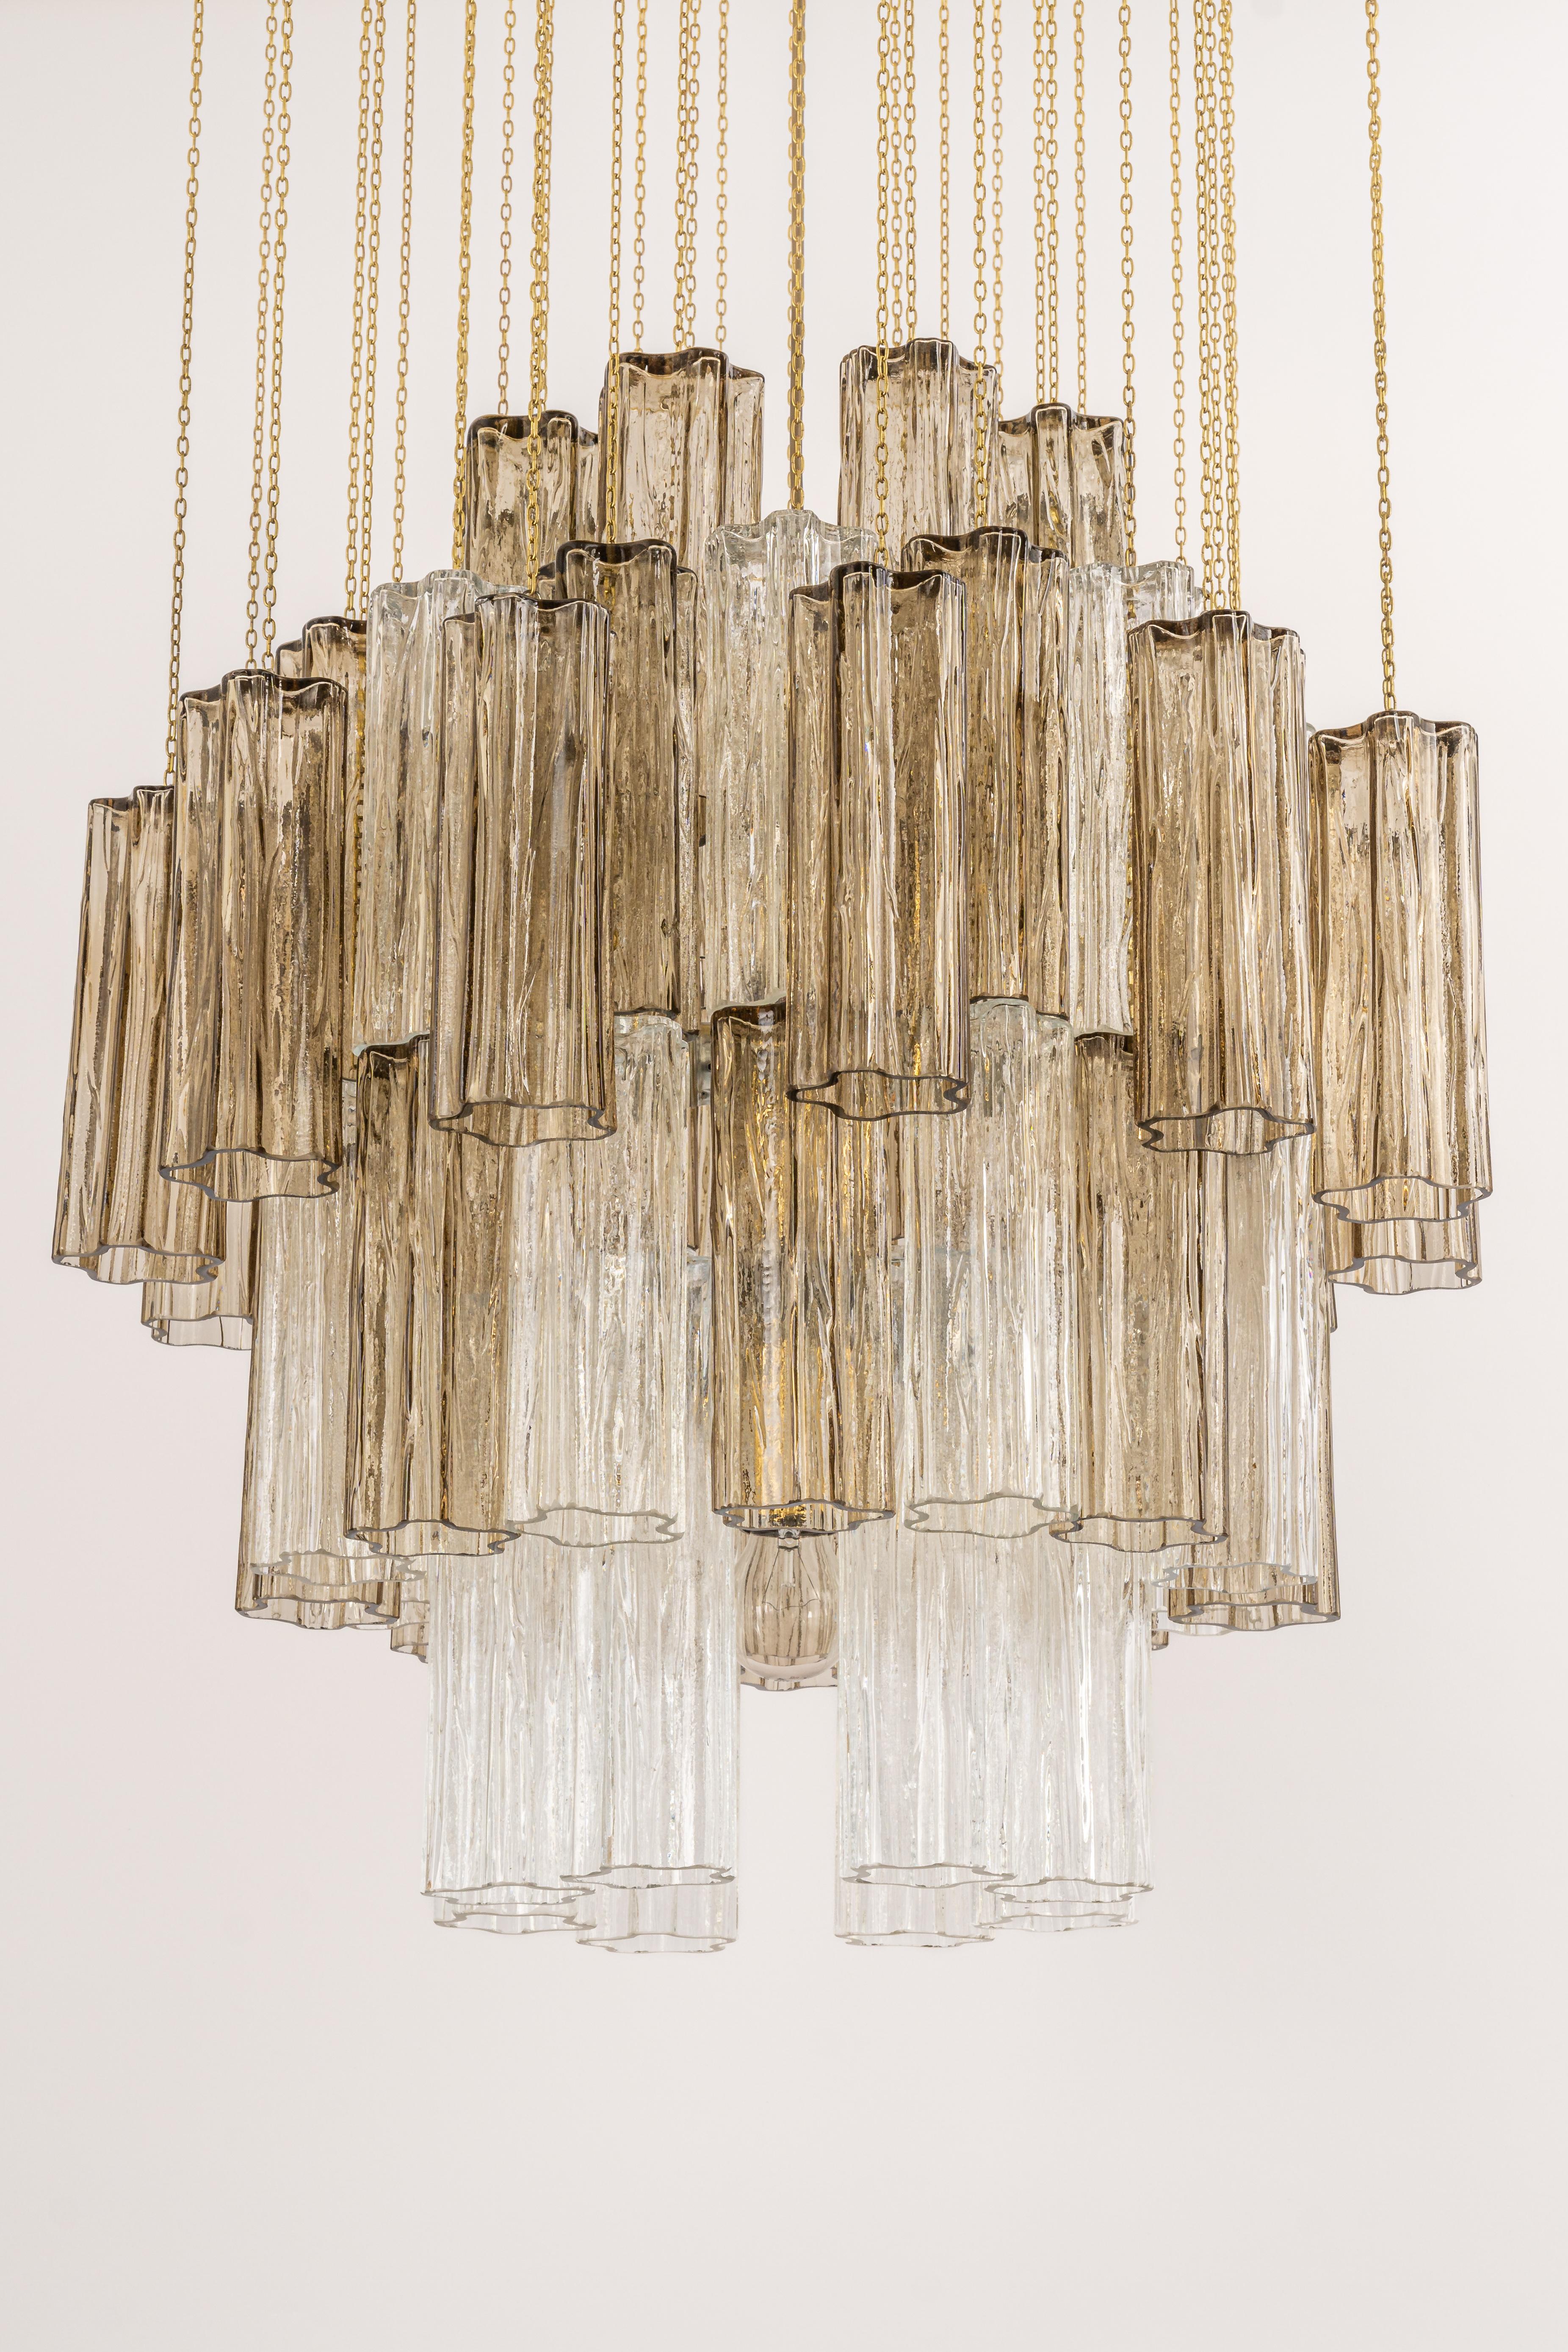 Stunning Murano glass chandelier designed by Venini for Kalmar, 1960s
Three tiers brass structure gather many structured glasses, beautifully refracting the light very heavy quality.

High quality and in very good condition. Cleaned, well-wired